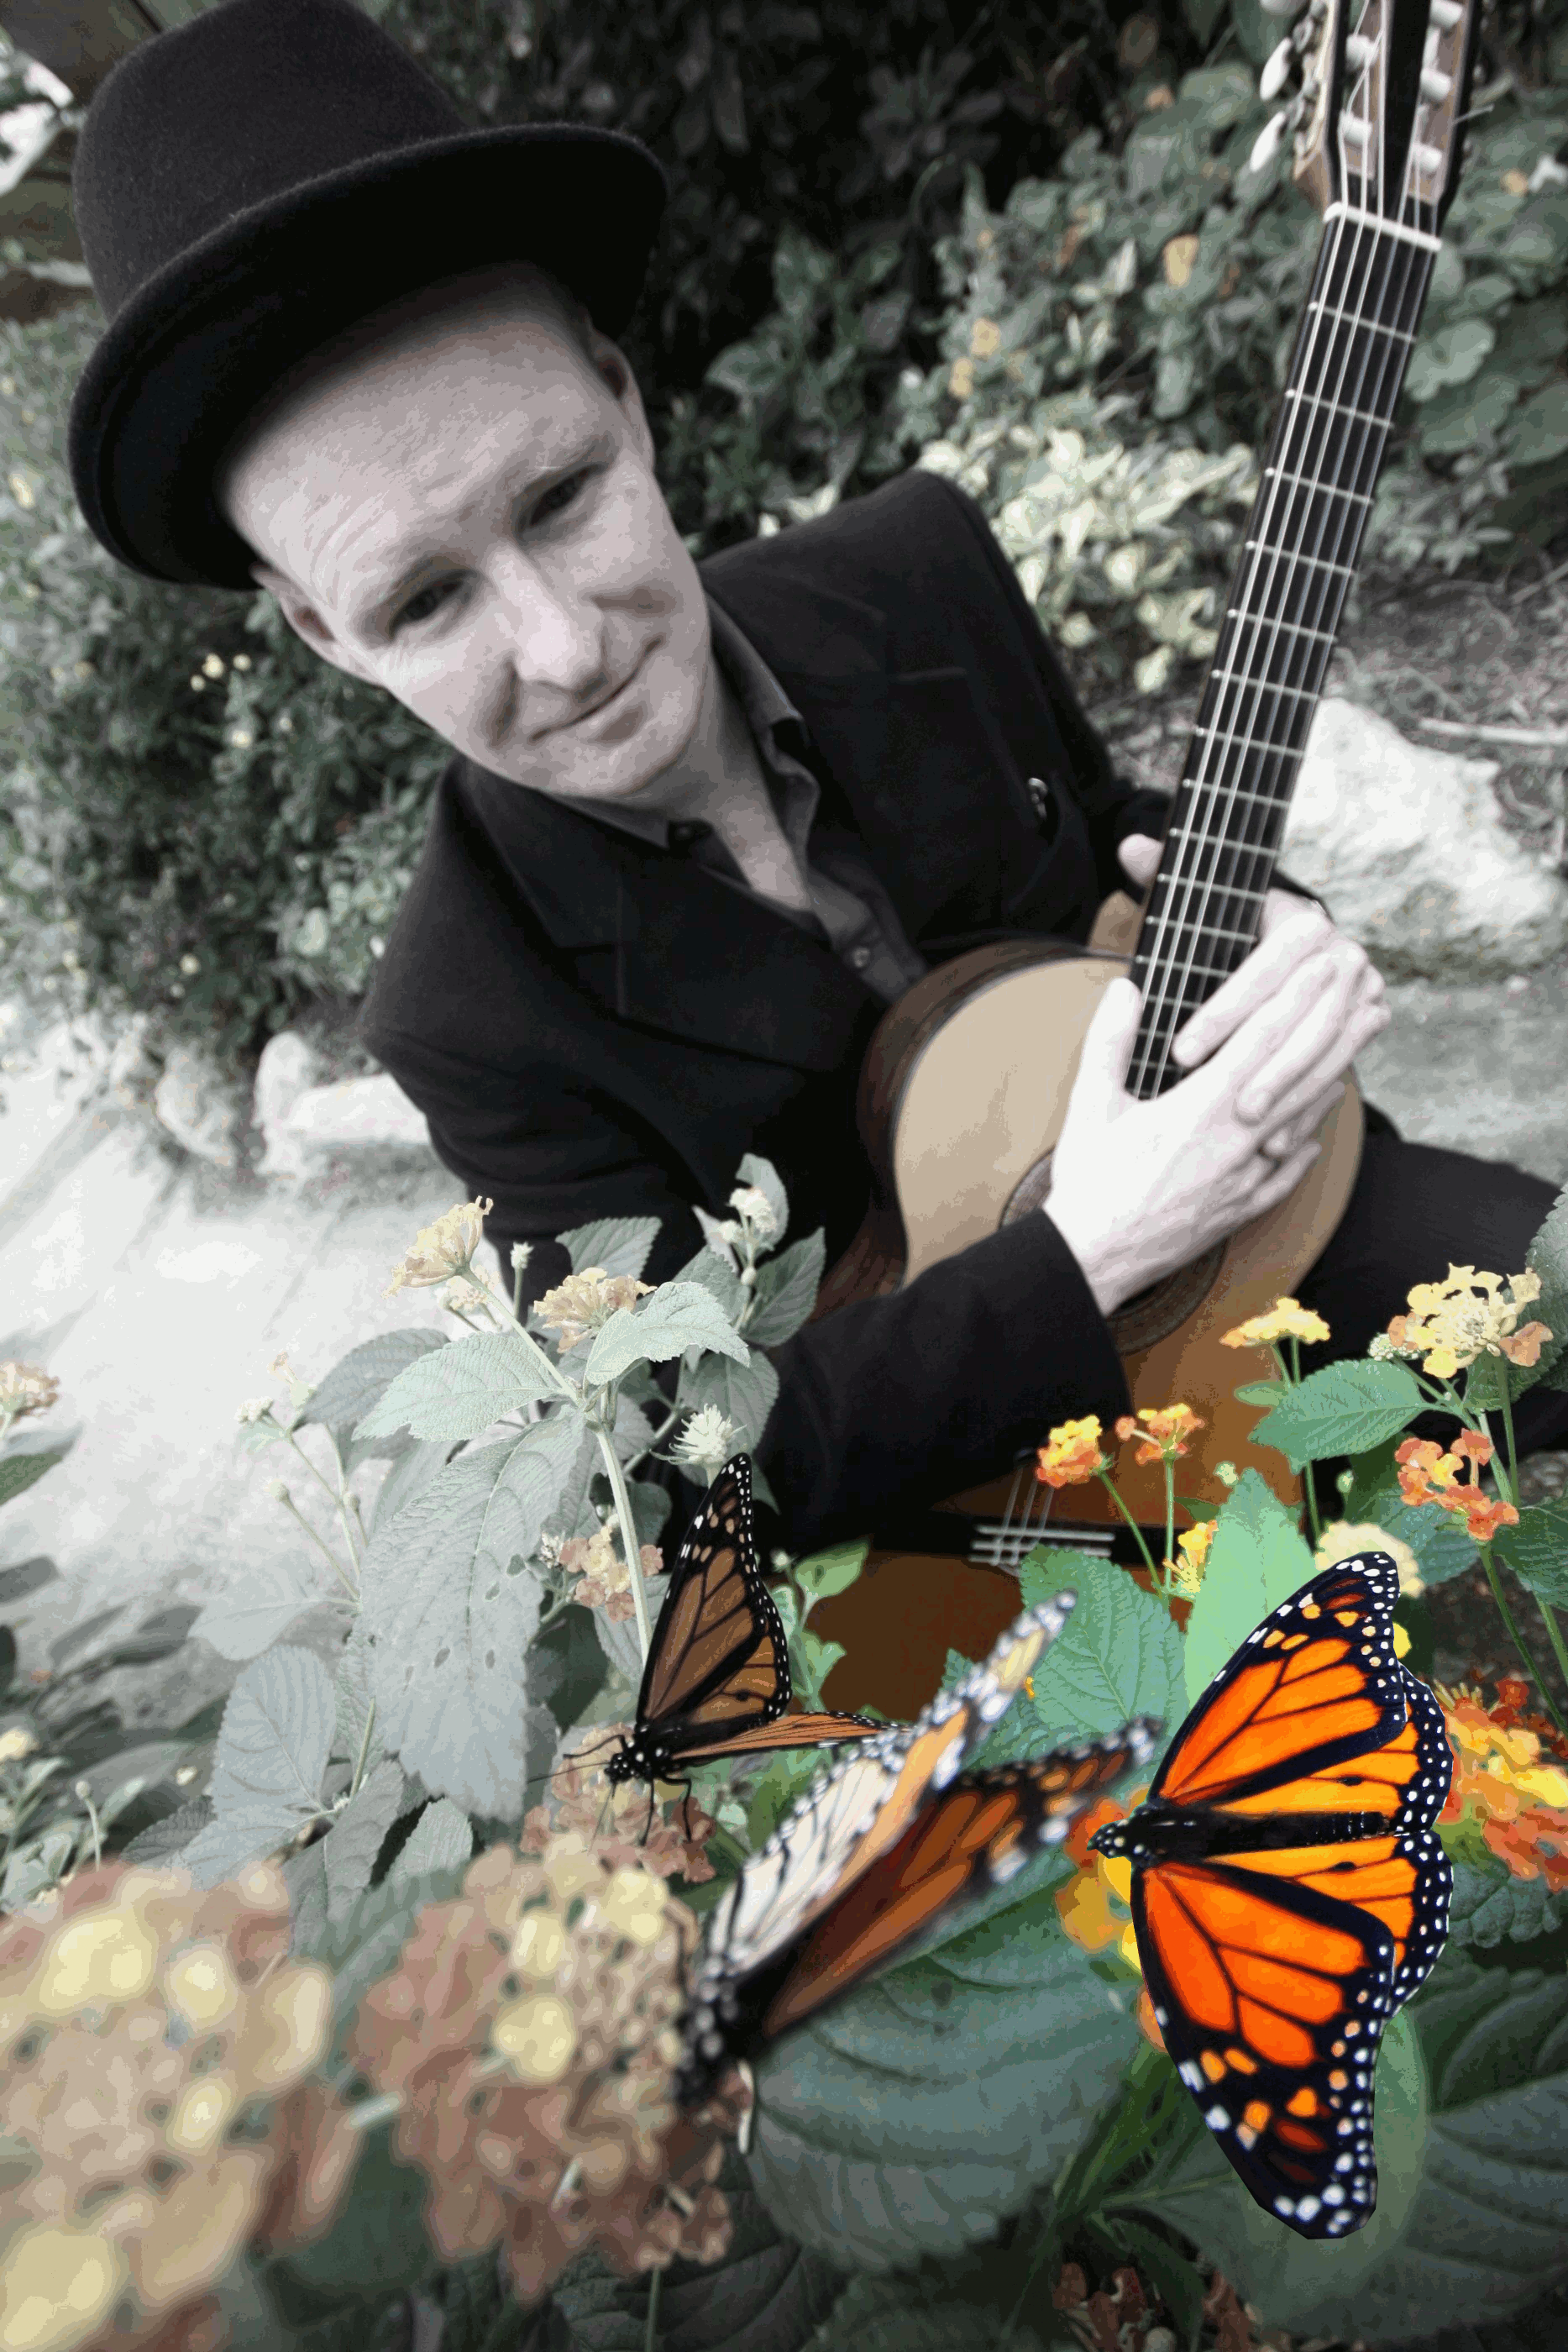 Hughie, with guitar and butterflies